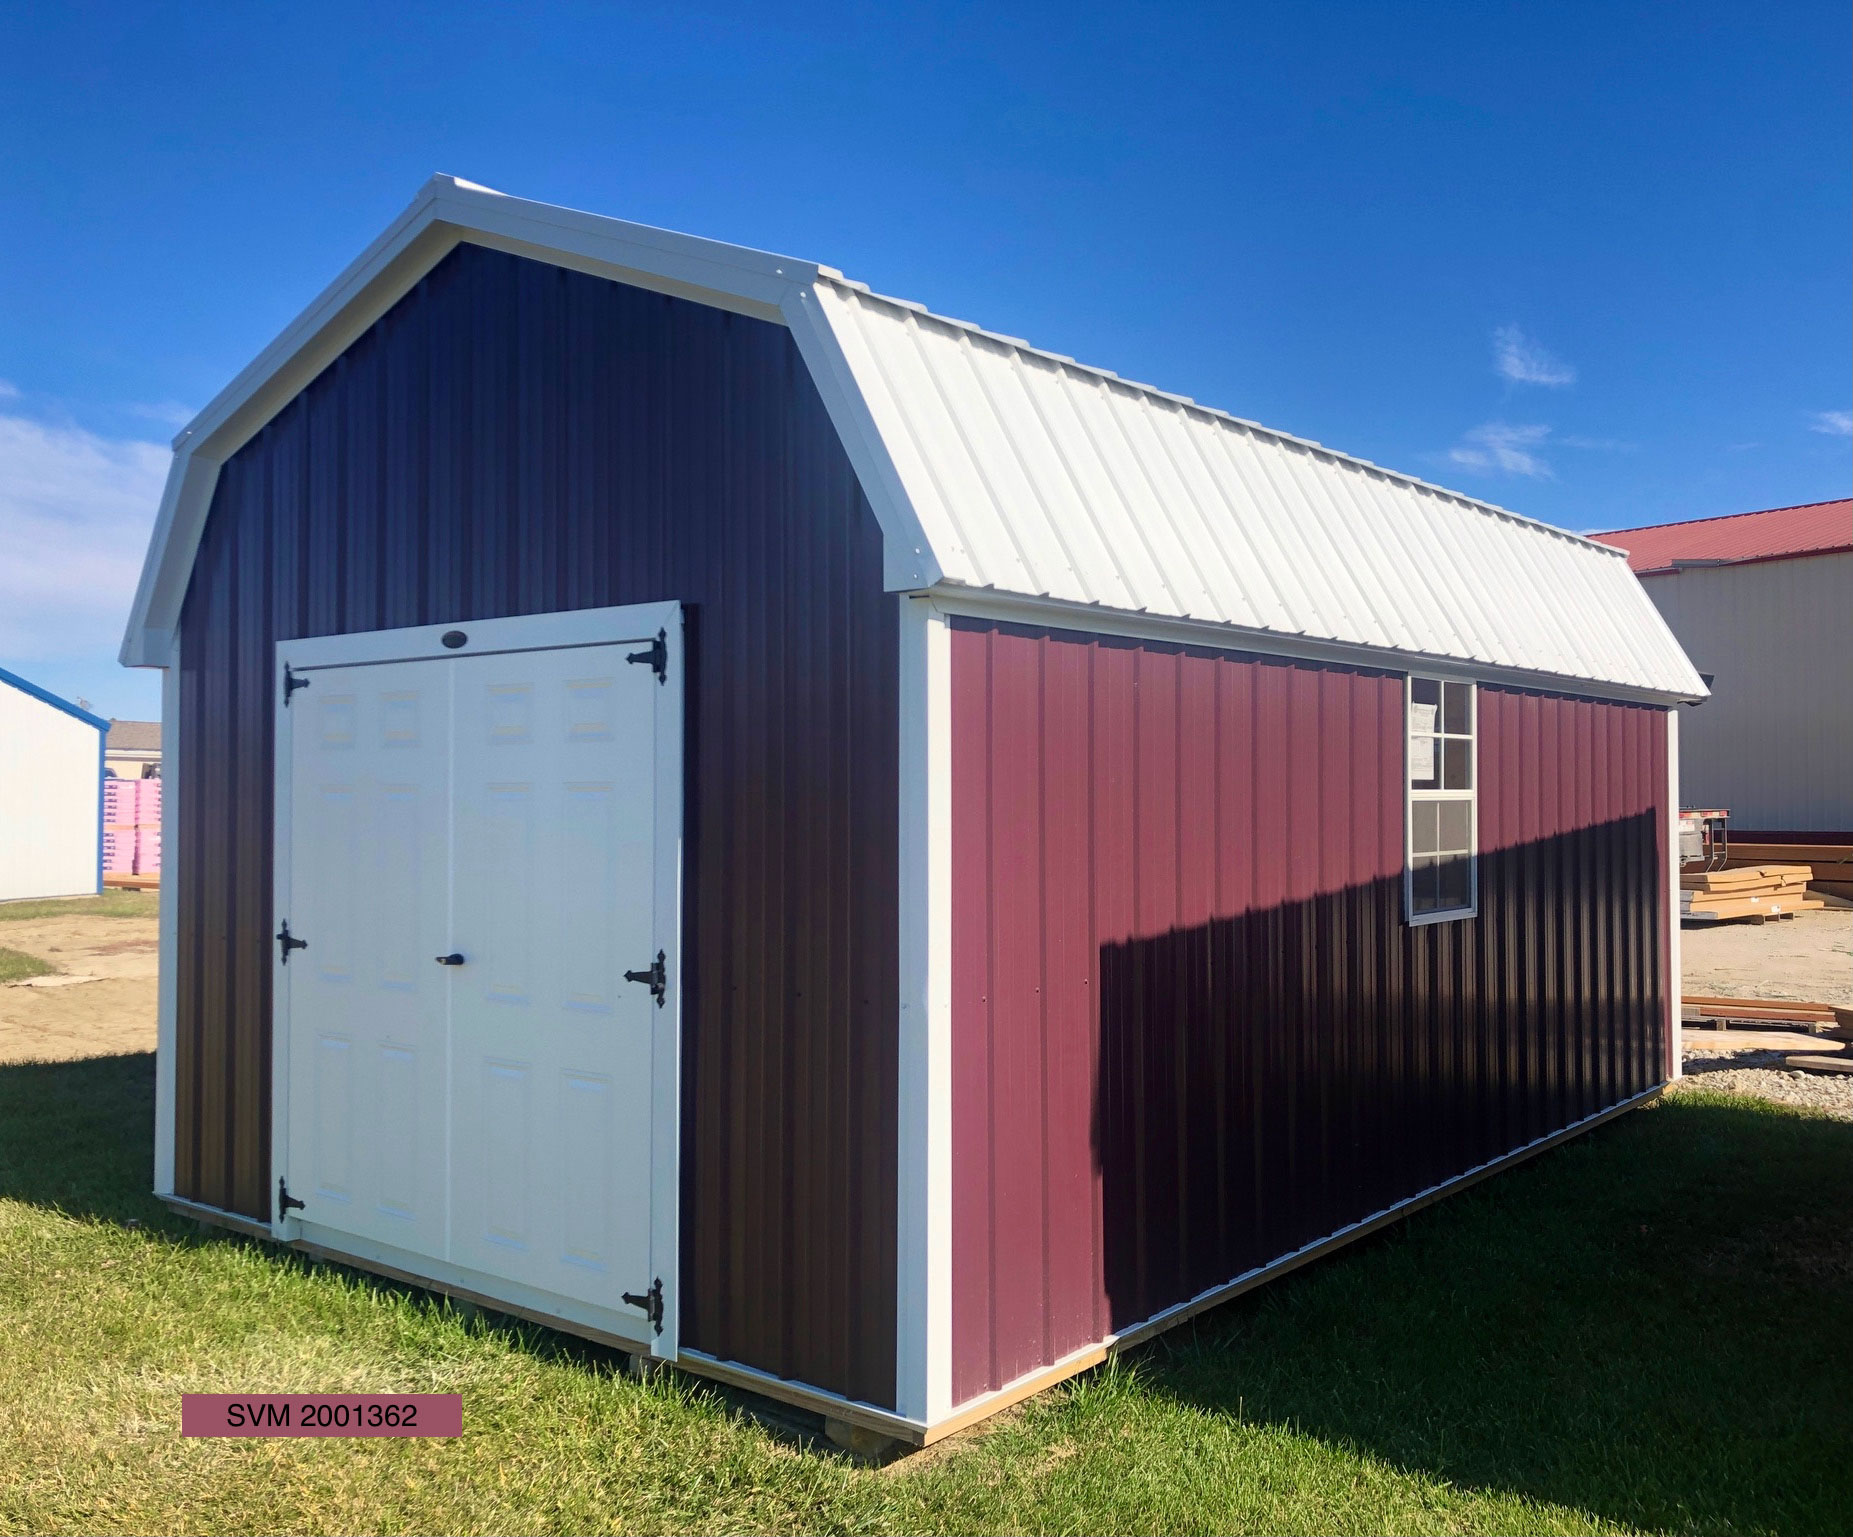 martins-mini-barns-spring-valley-sheds-gallery (115)